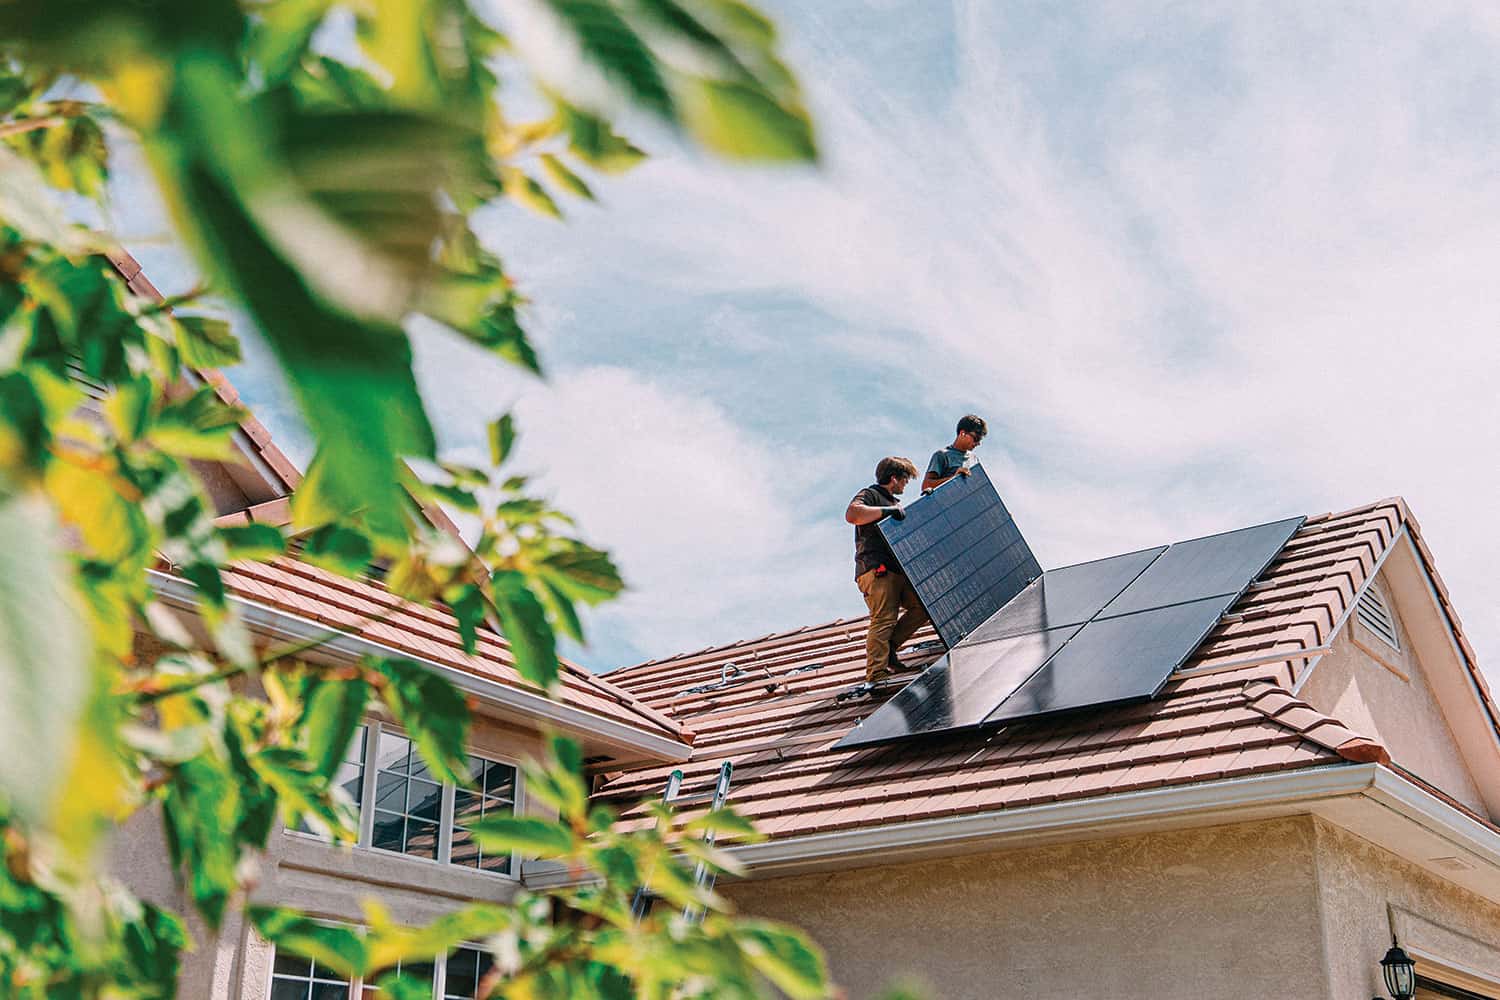 Pic: photo of two workmen installing solar panels on roof of house.